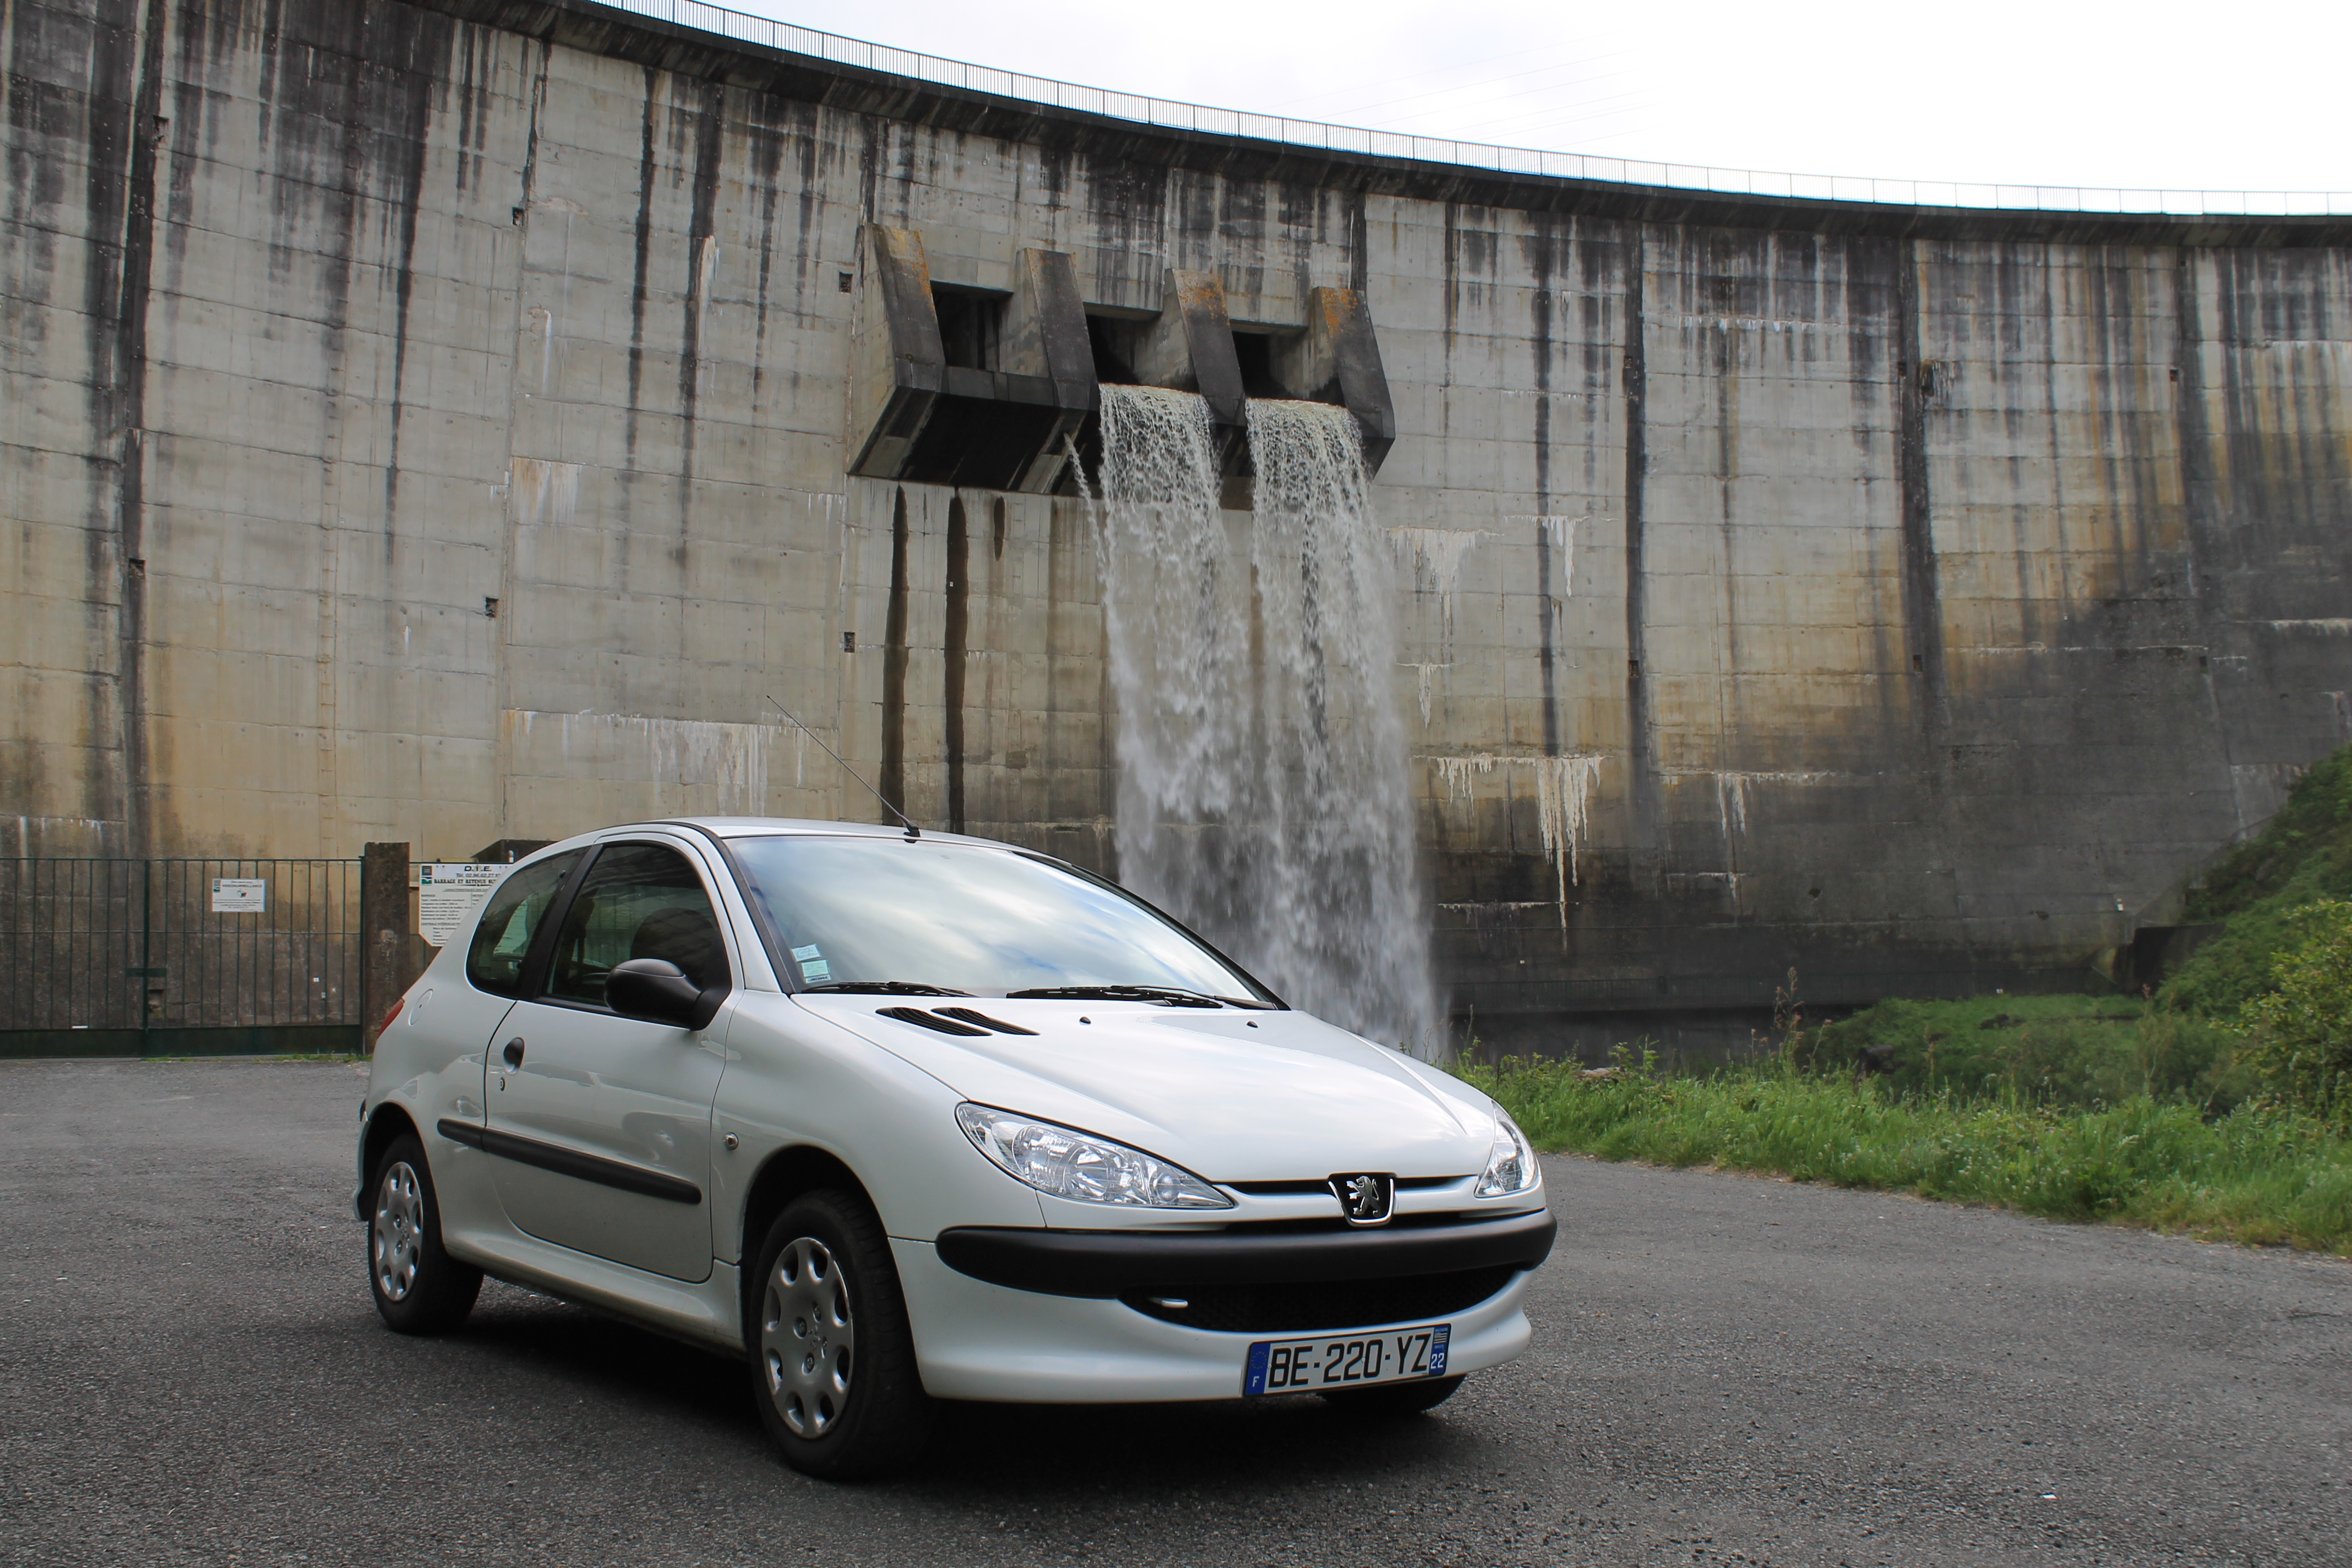 Peugeot 206 on white stock image. Image of view, small - 71135301